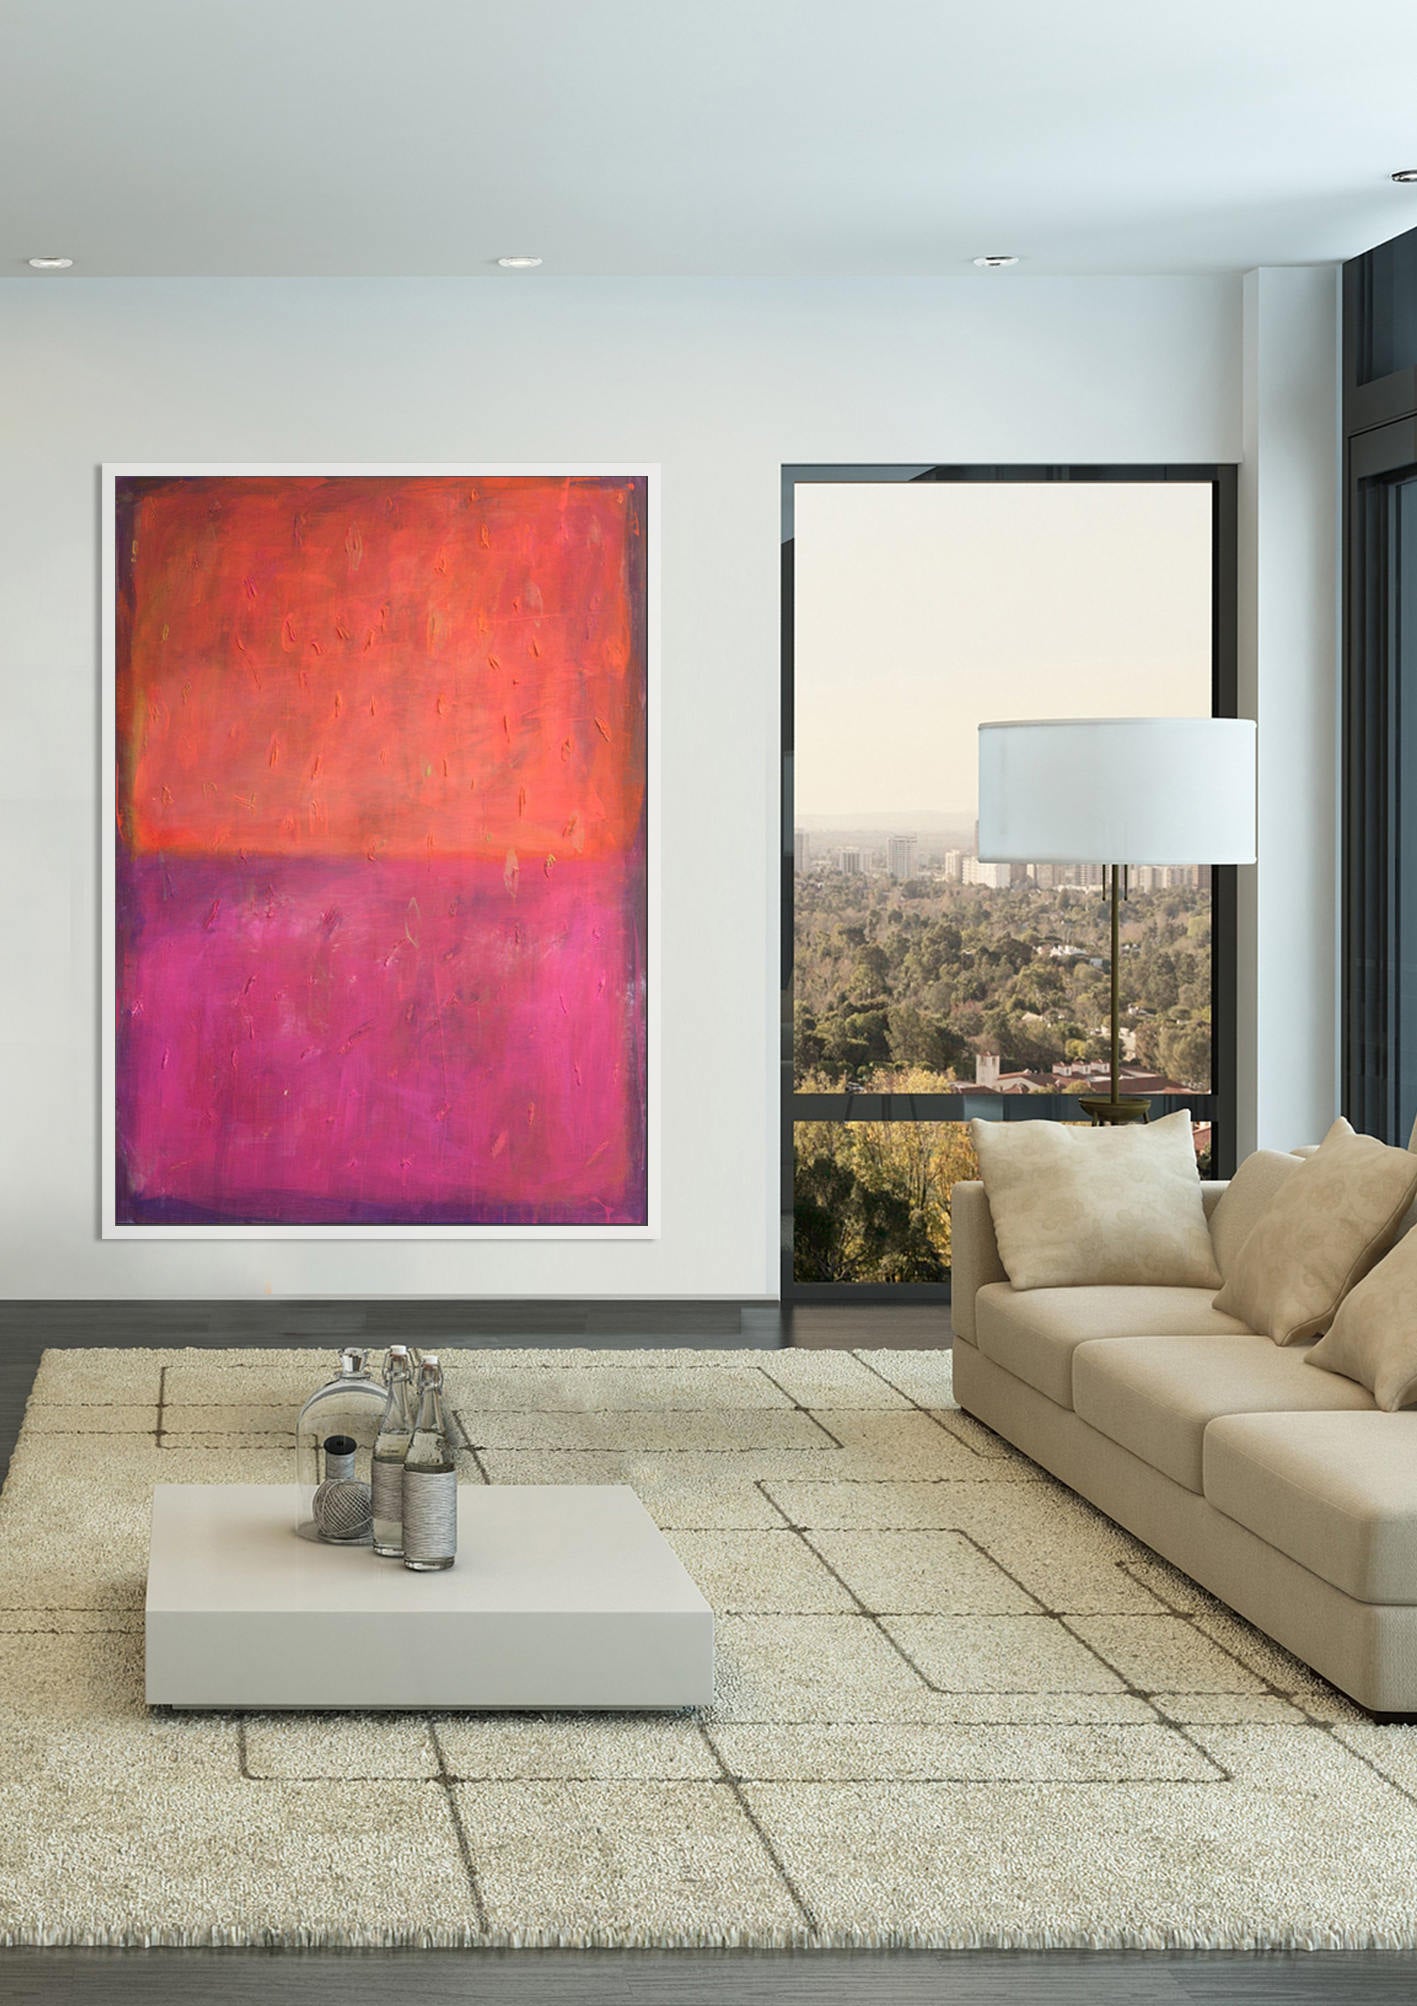 Orange Red Abstract Painting | Original Painting on Canvas Acrylic Oil Contemporary Extra Large Abstract Art | Wall Decor | Texture Painting - camilomattis.com